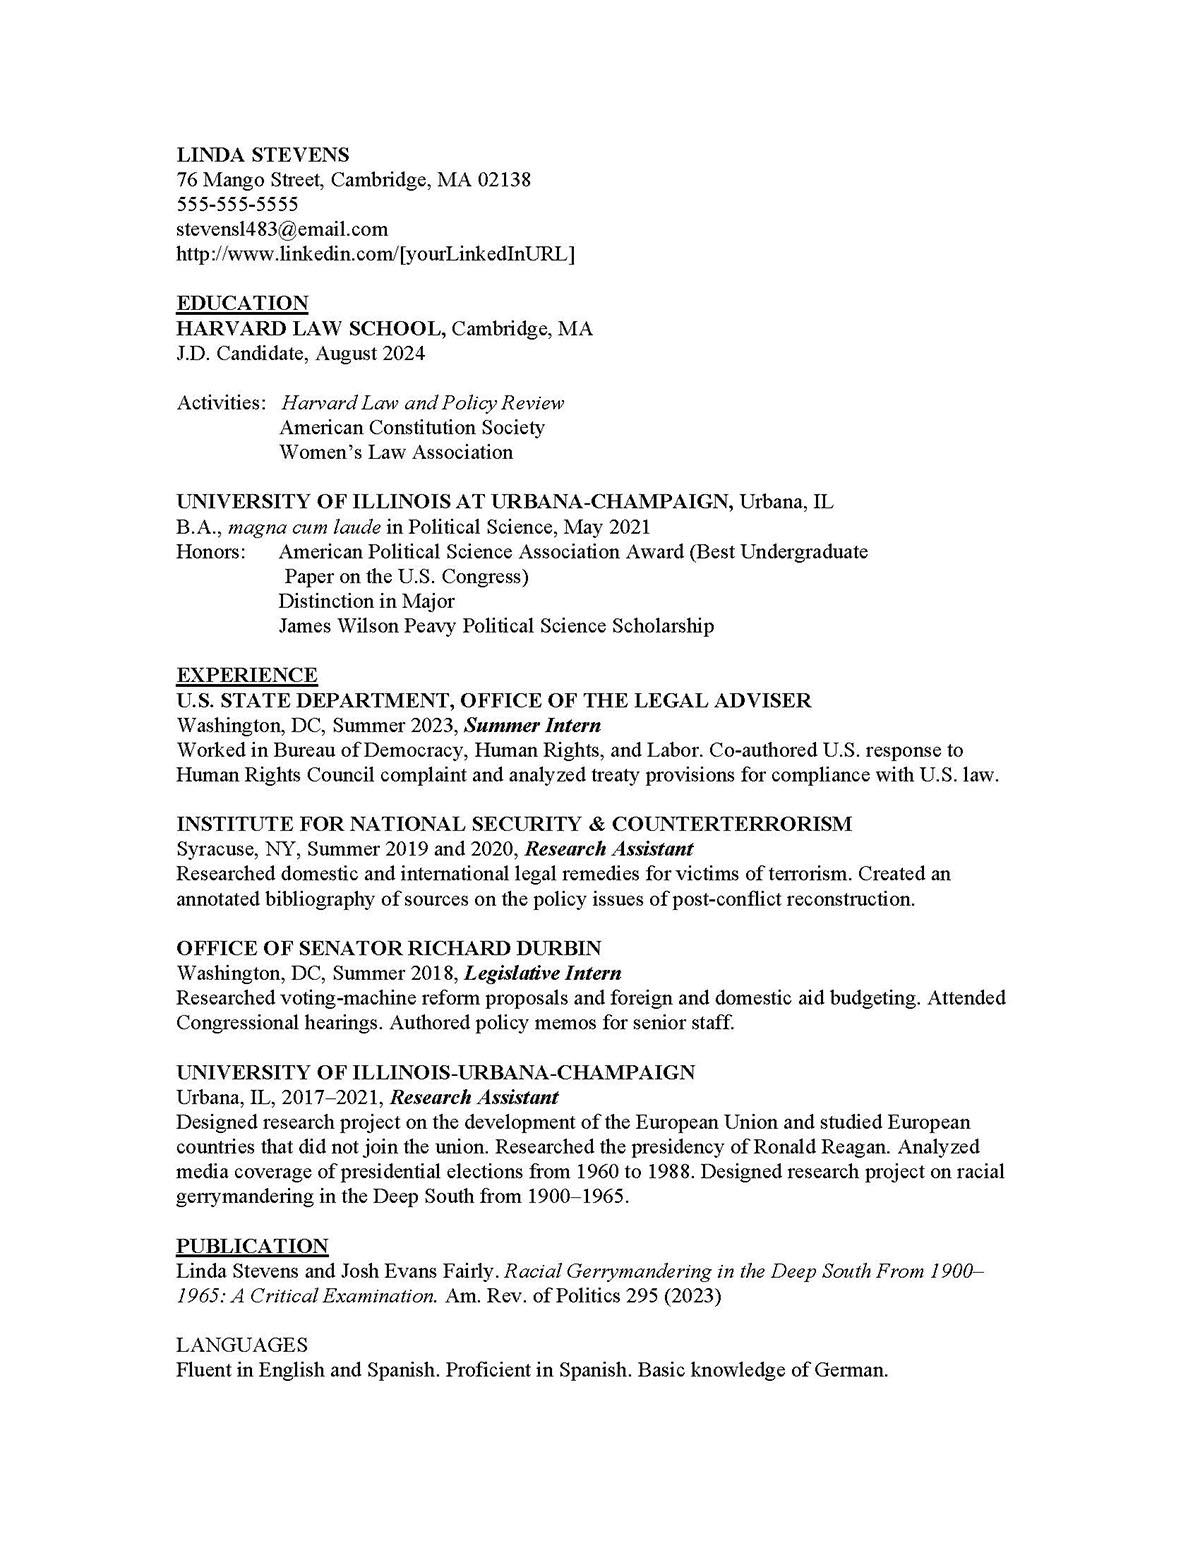 Sample resume: Law, Entry Level, Combination